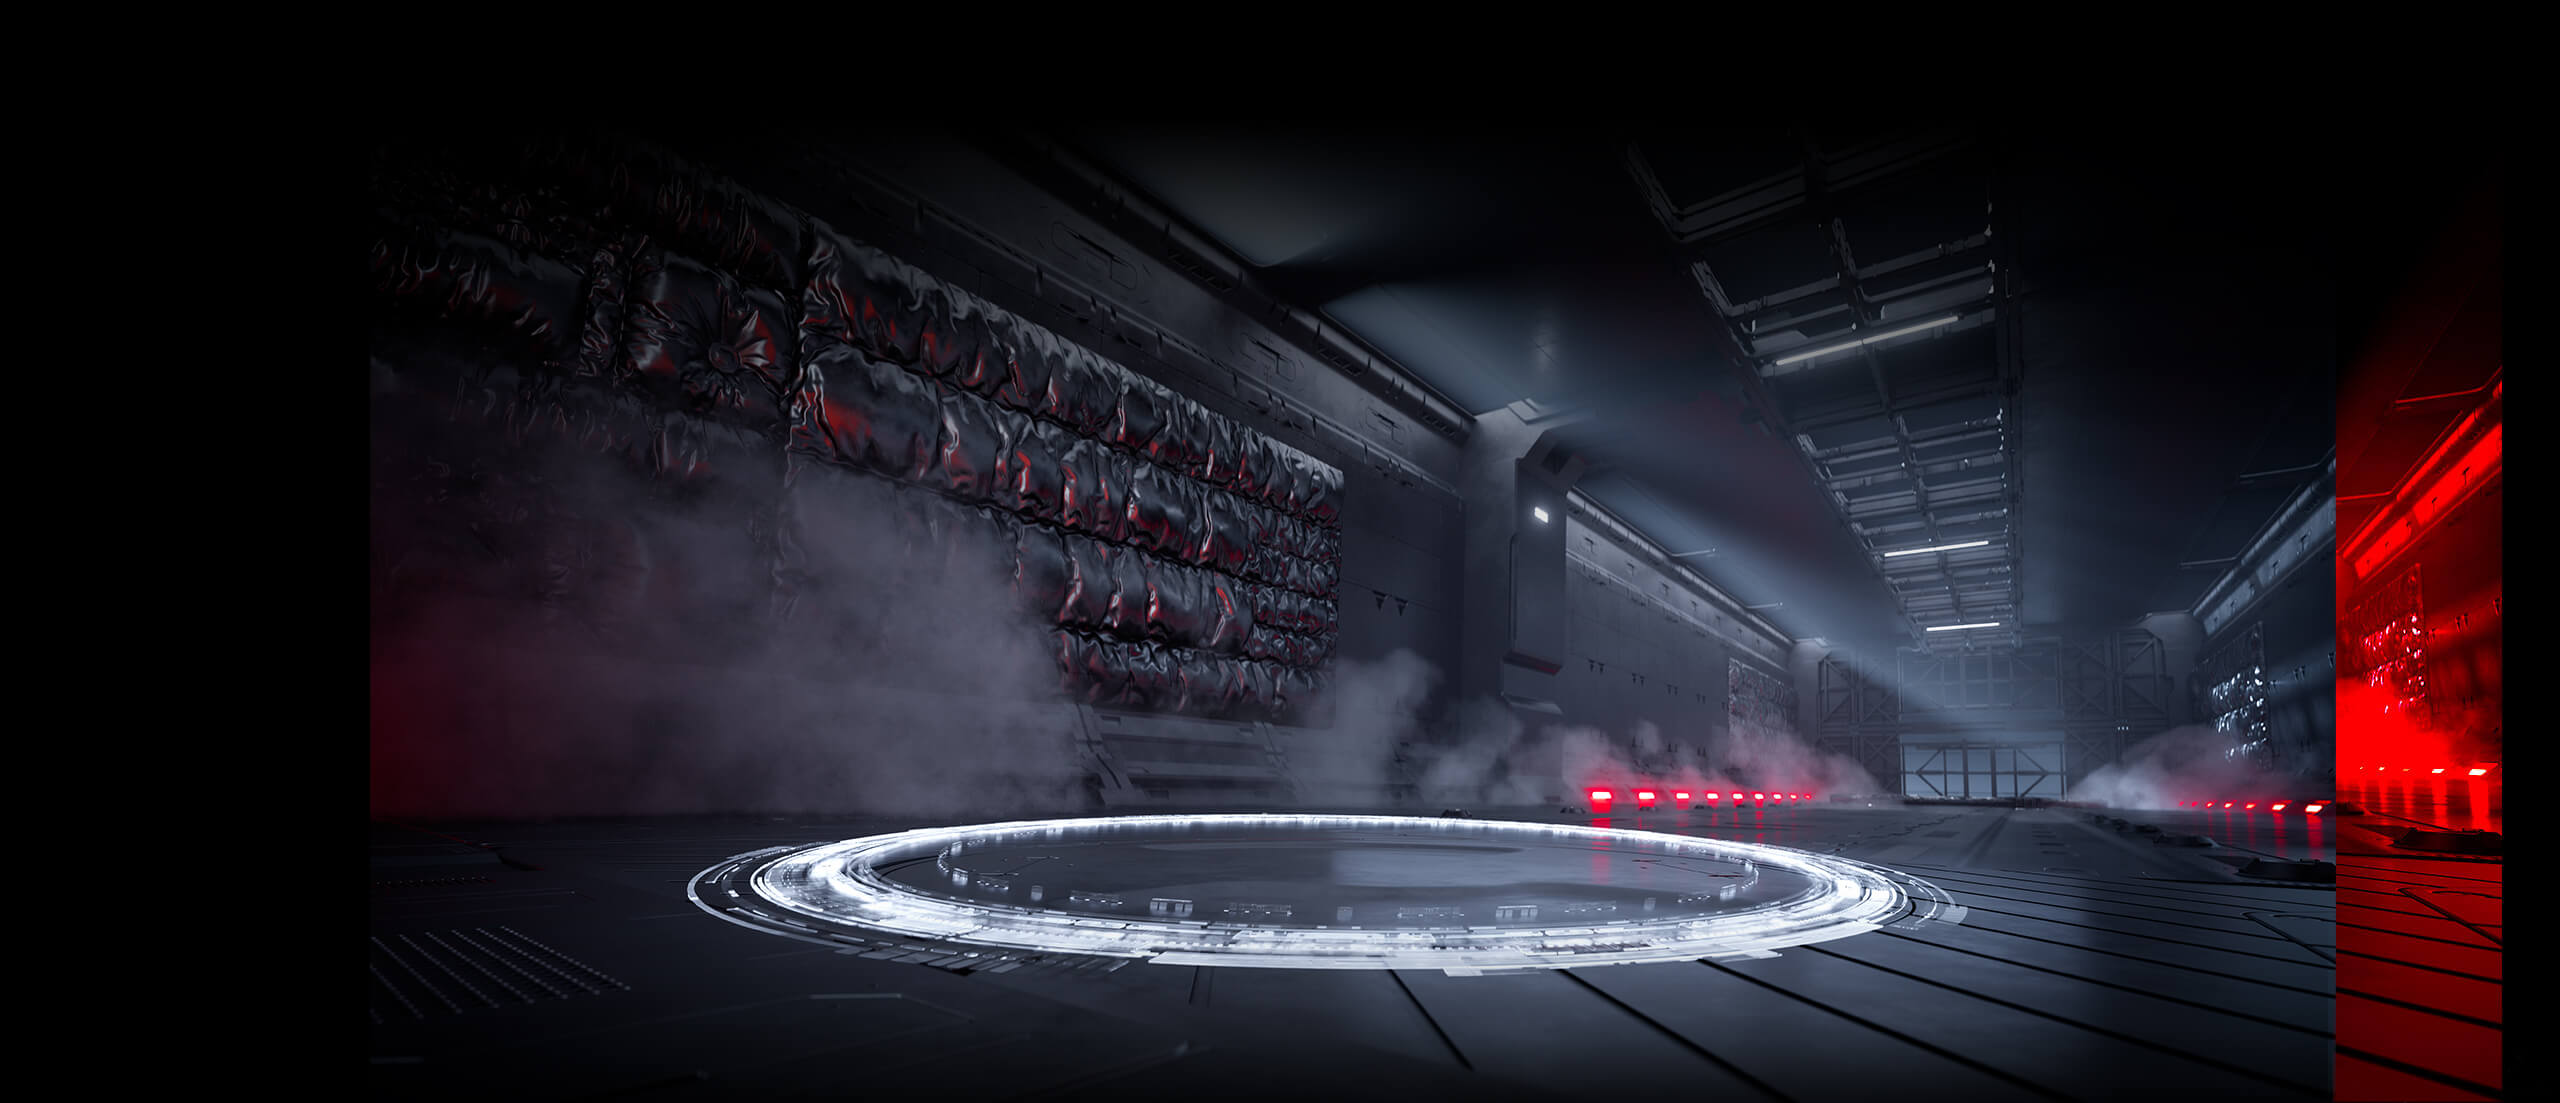 The ROG Chakram X Origin is at the end of a long arena, hovering above a circle of light